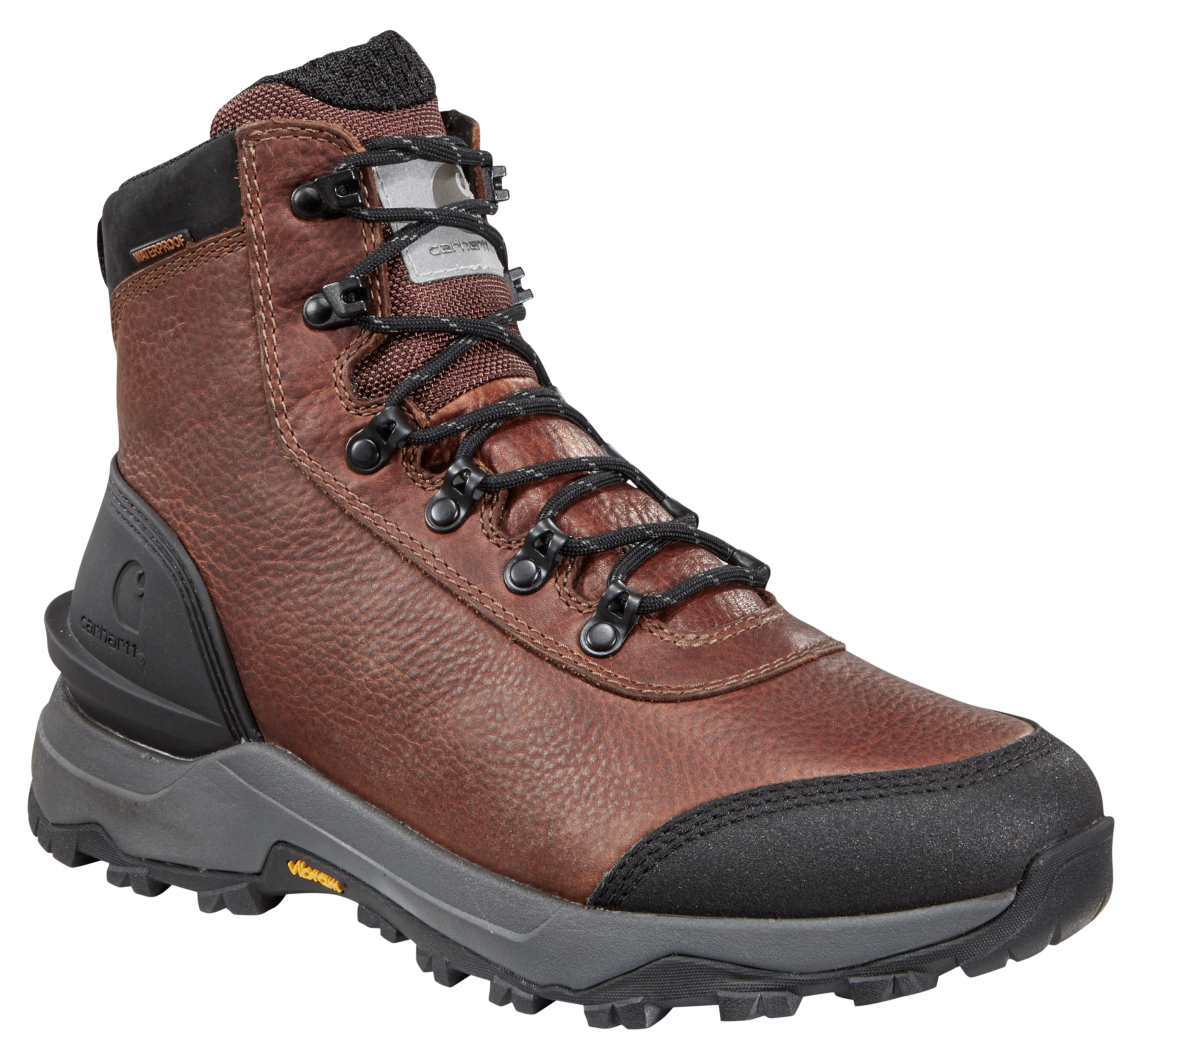 Carhartt Outdoor Hiker Insulated Waterproof Hiking Boots for Men - Mineral Red - 11.5M